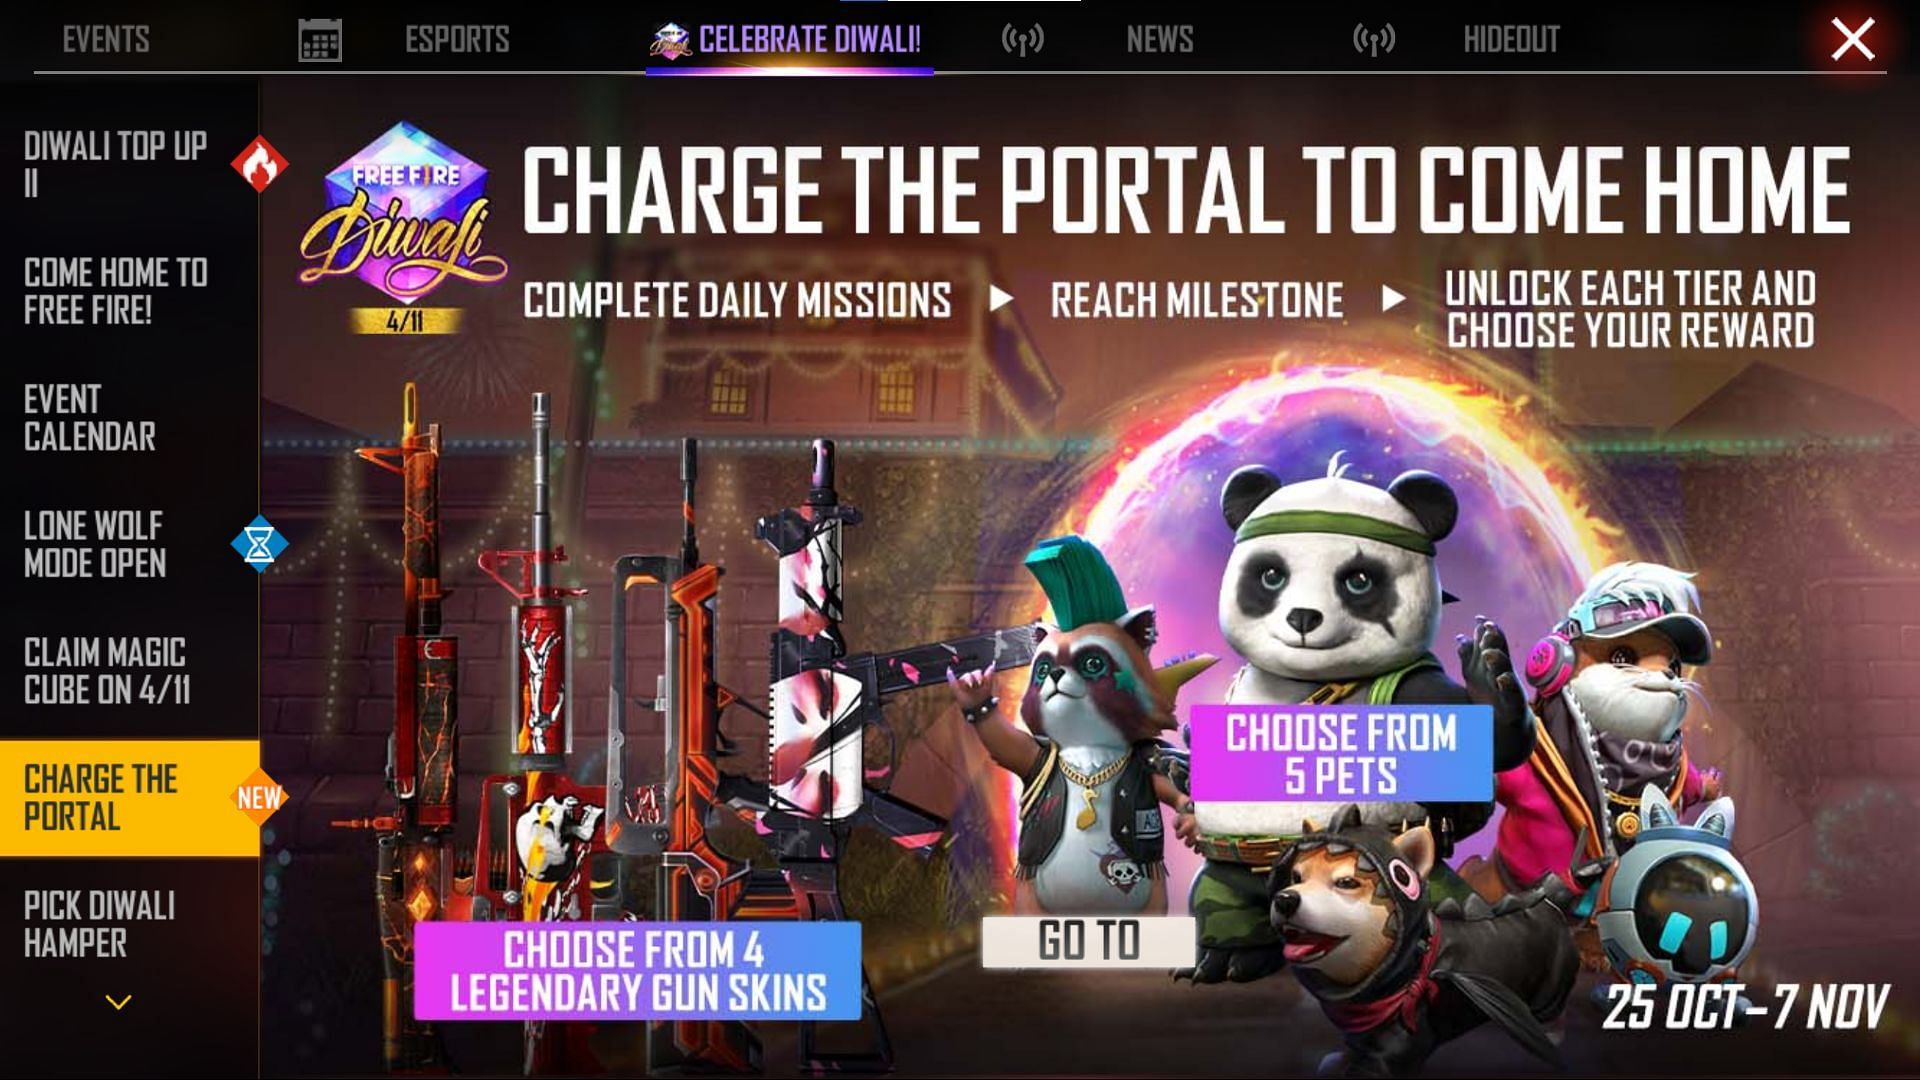 The Charge the Portal event provided a free gun skin during Diwali celebrations (Image via Garena)